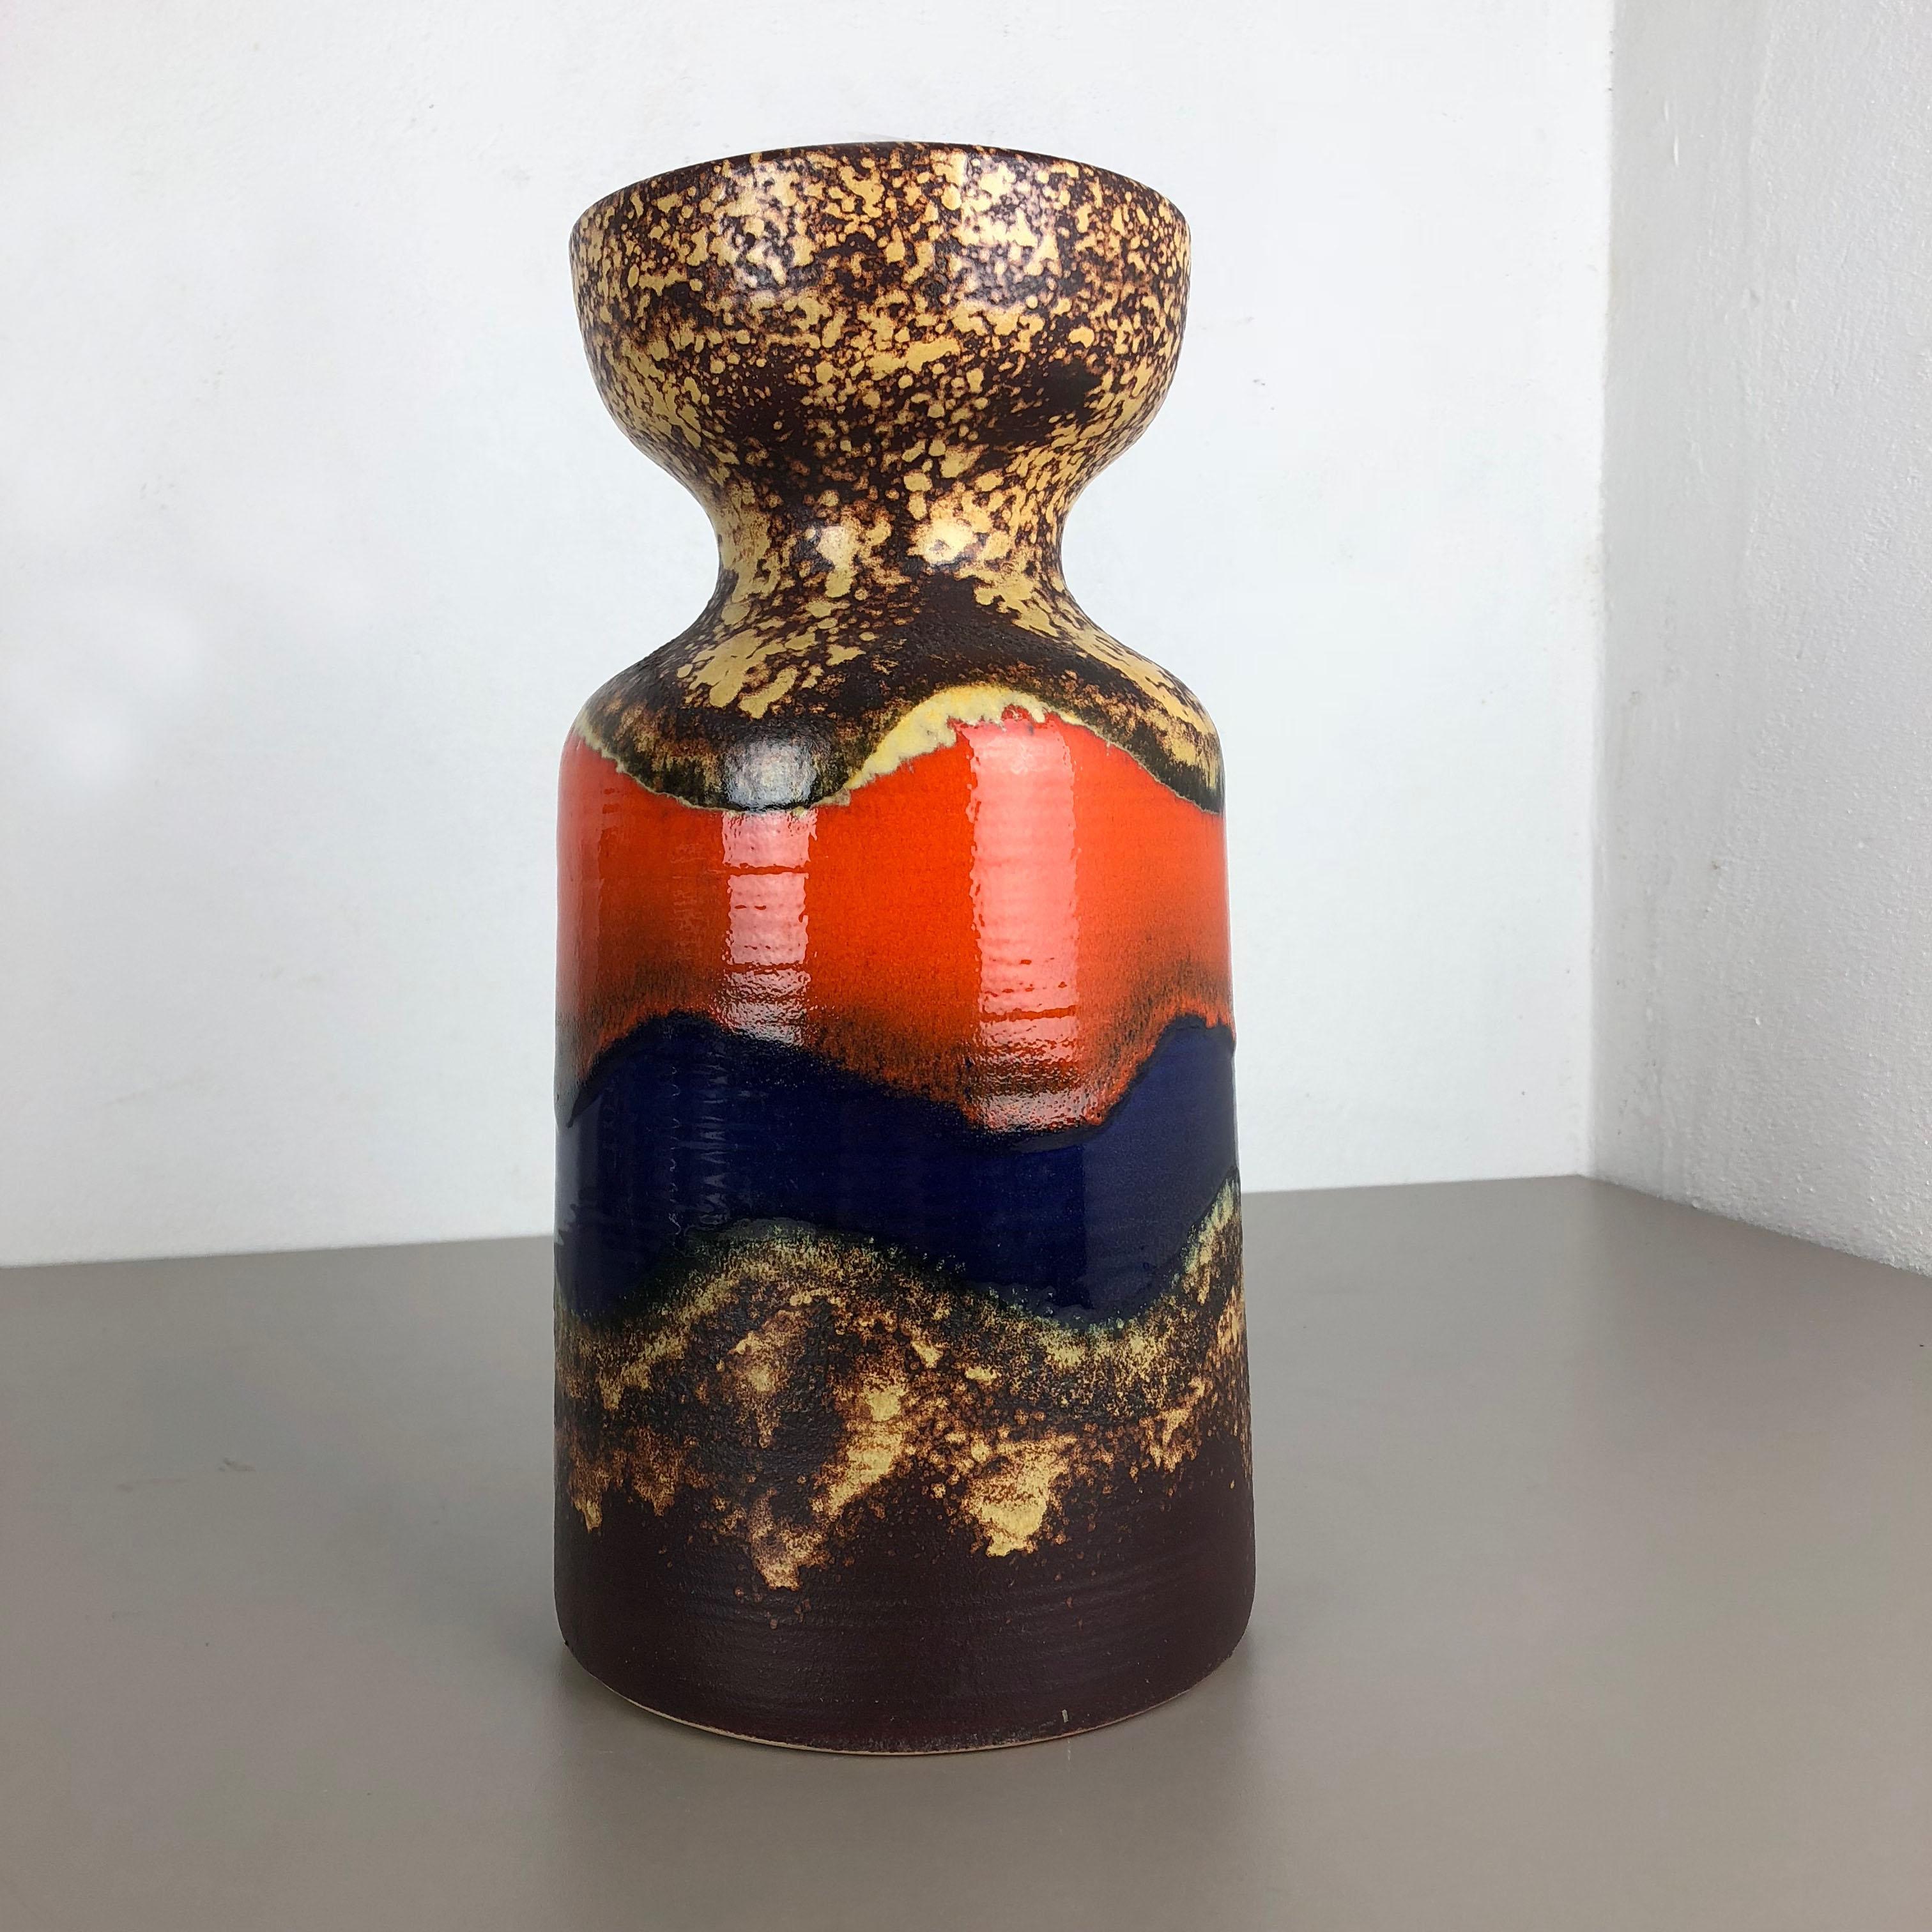 Article:

Pottery ceramic vase 


Producer:

Dümmler and Breiden, Germany


Decade:

1970s



Description:

Original vintage 1970s pottery ceramic vase made in Germany. High quality German production with a nice abstract